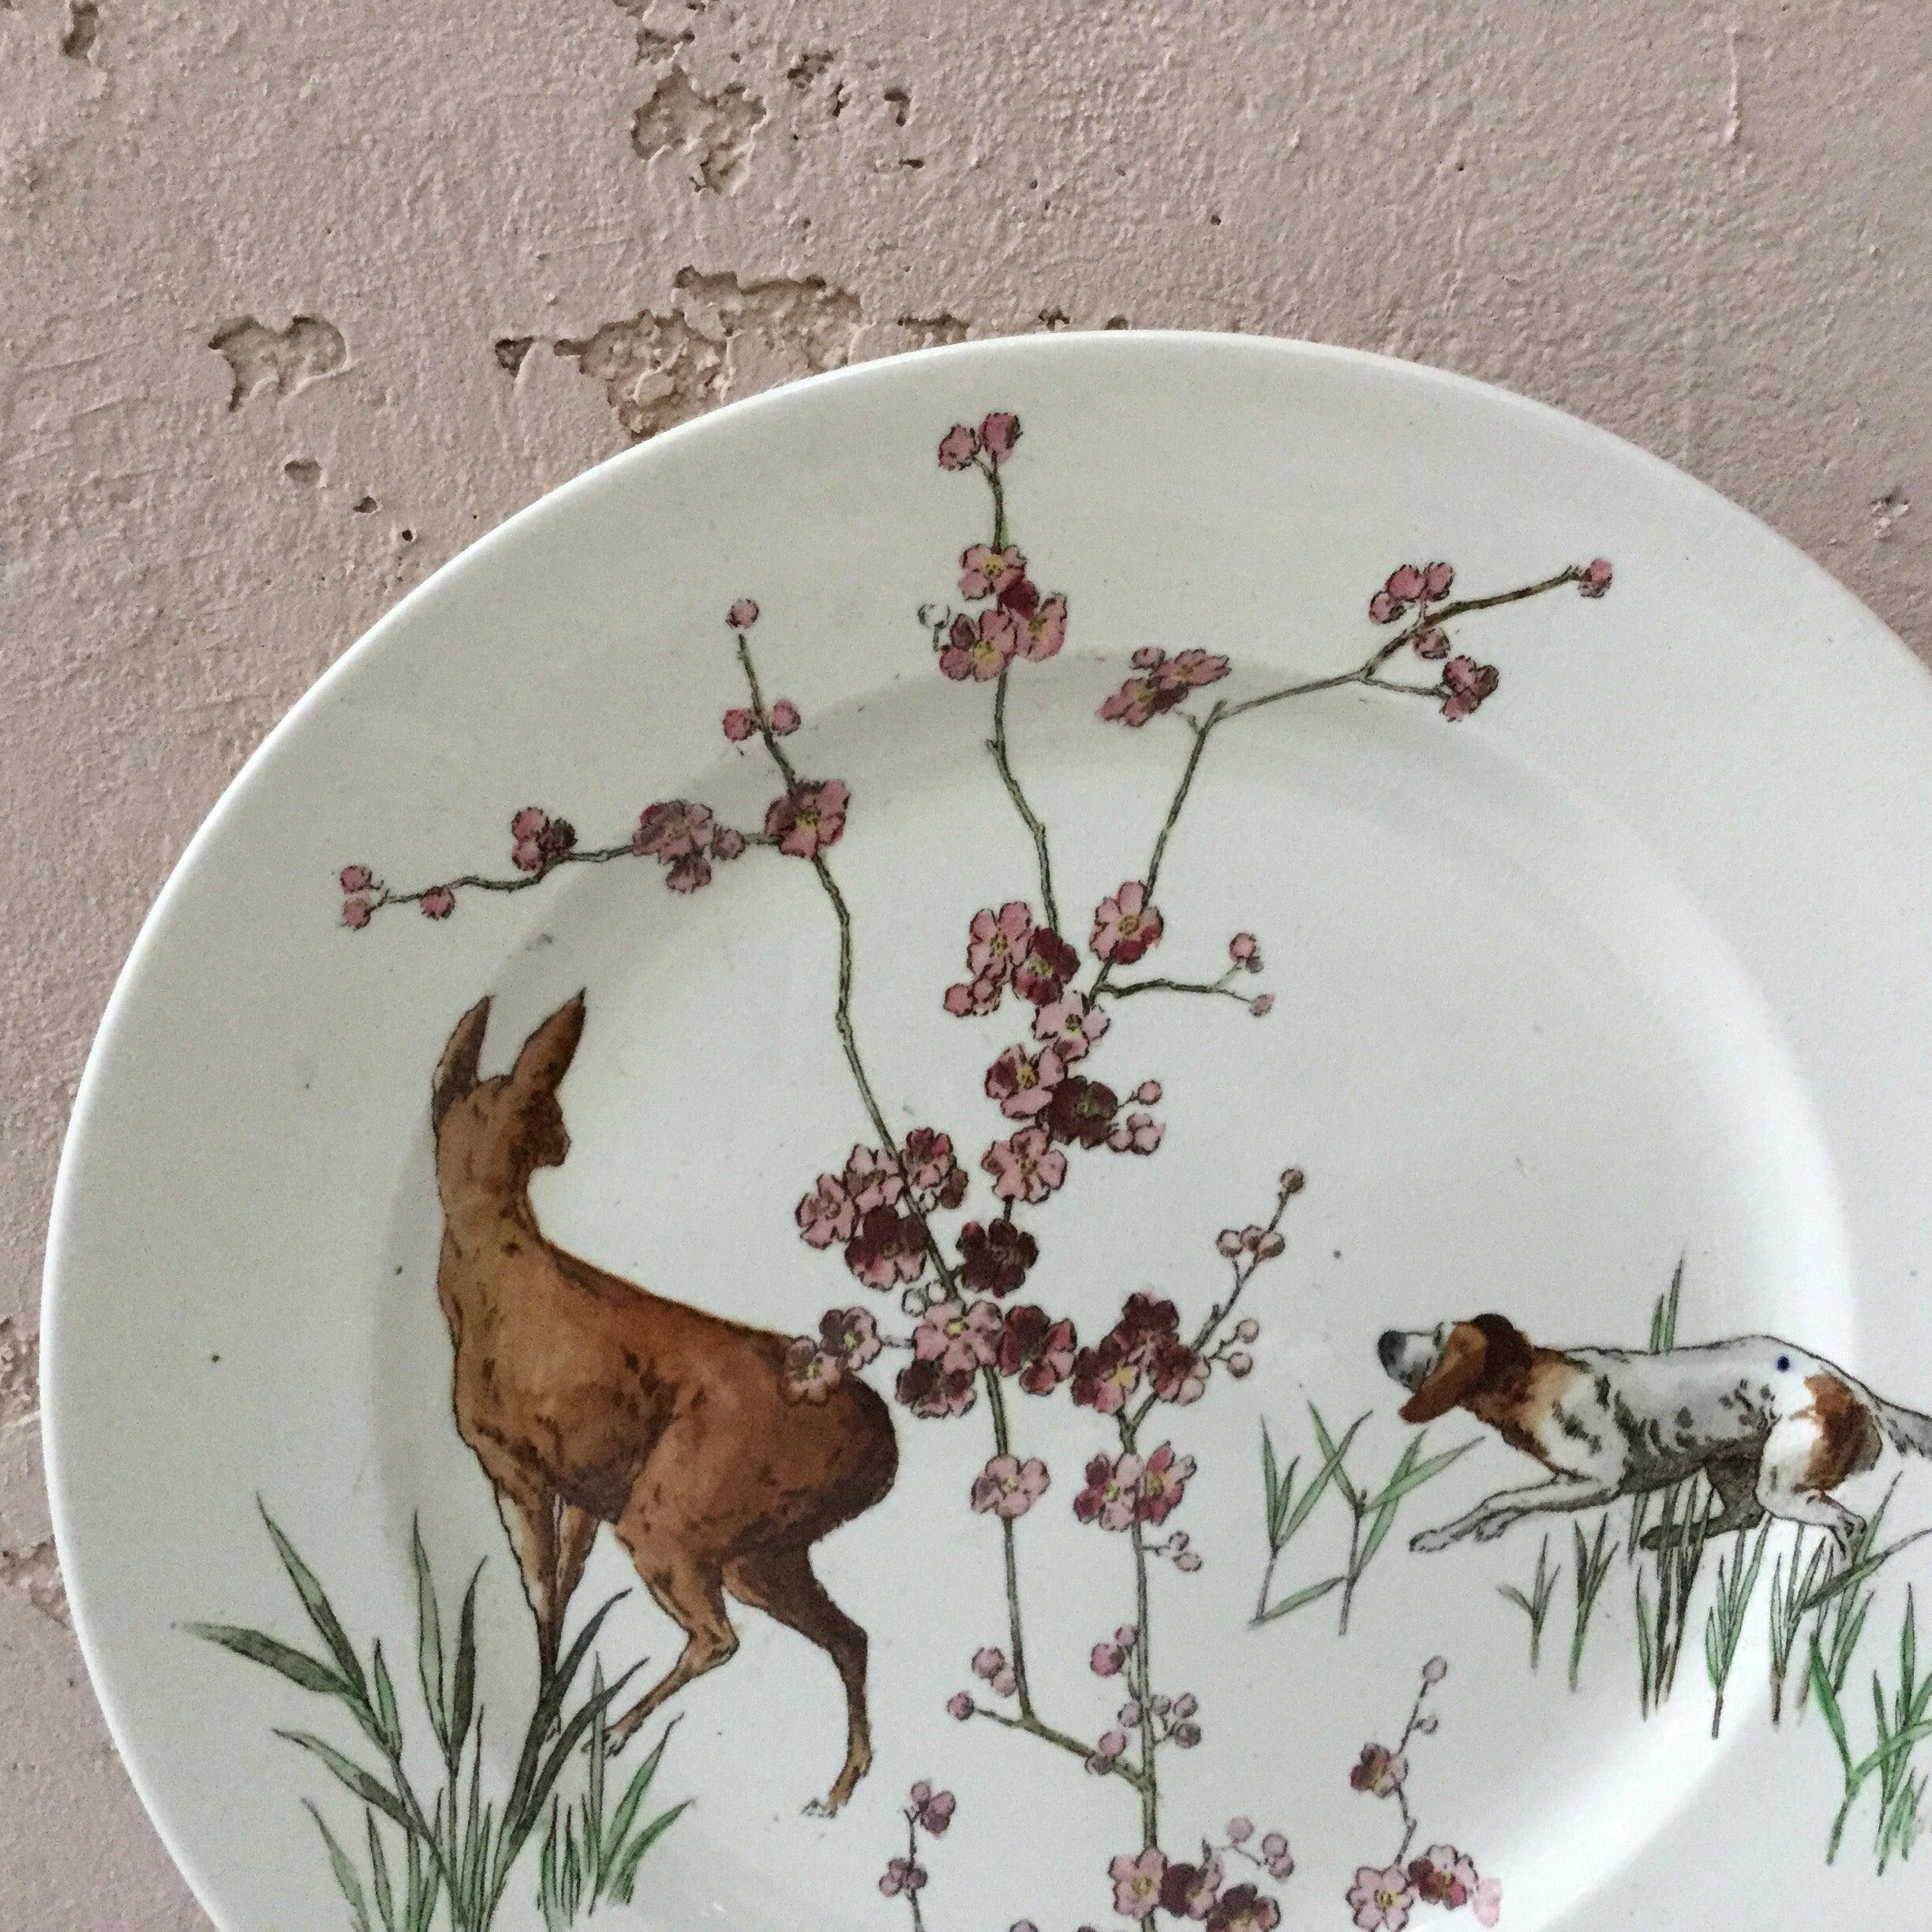 Large English faience plate signed Doulton Burslem (1882-1902) with a hunting dog and a deer with wild flowers.